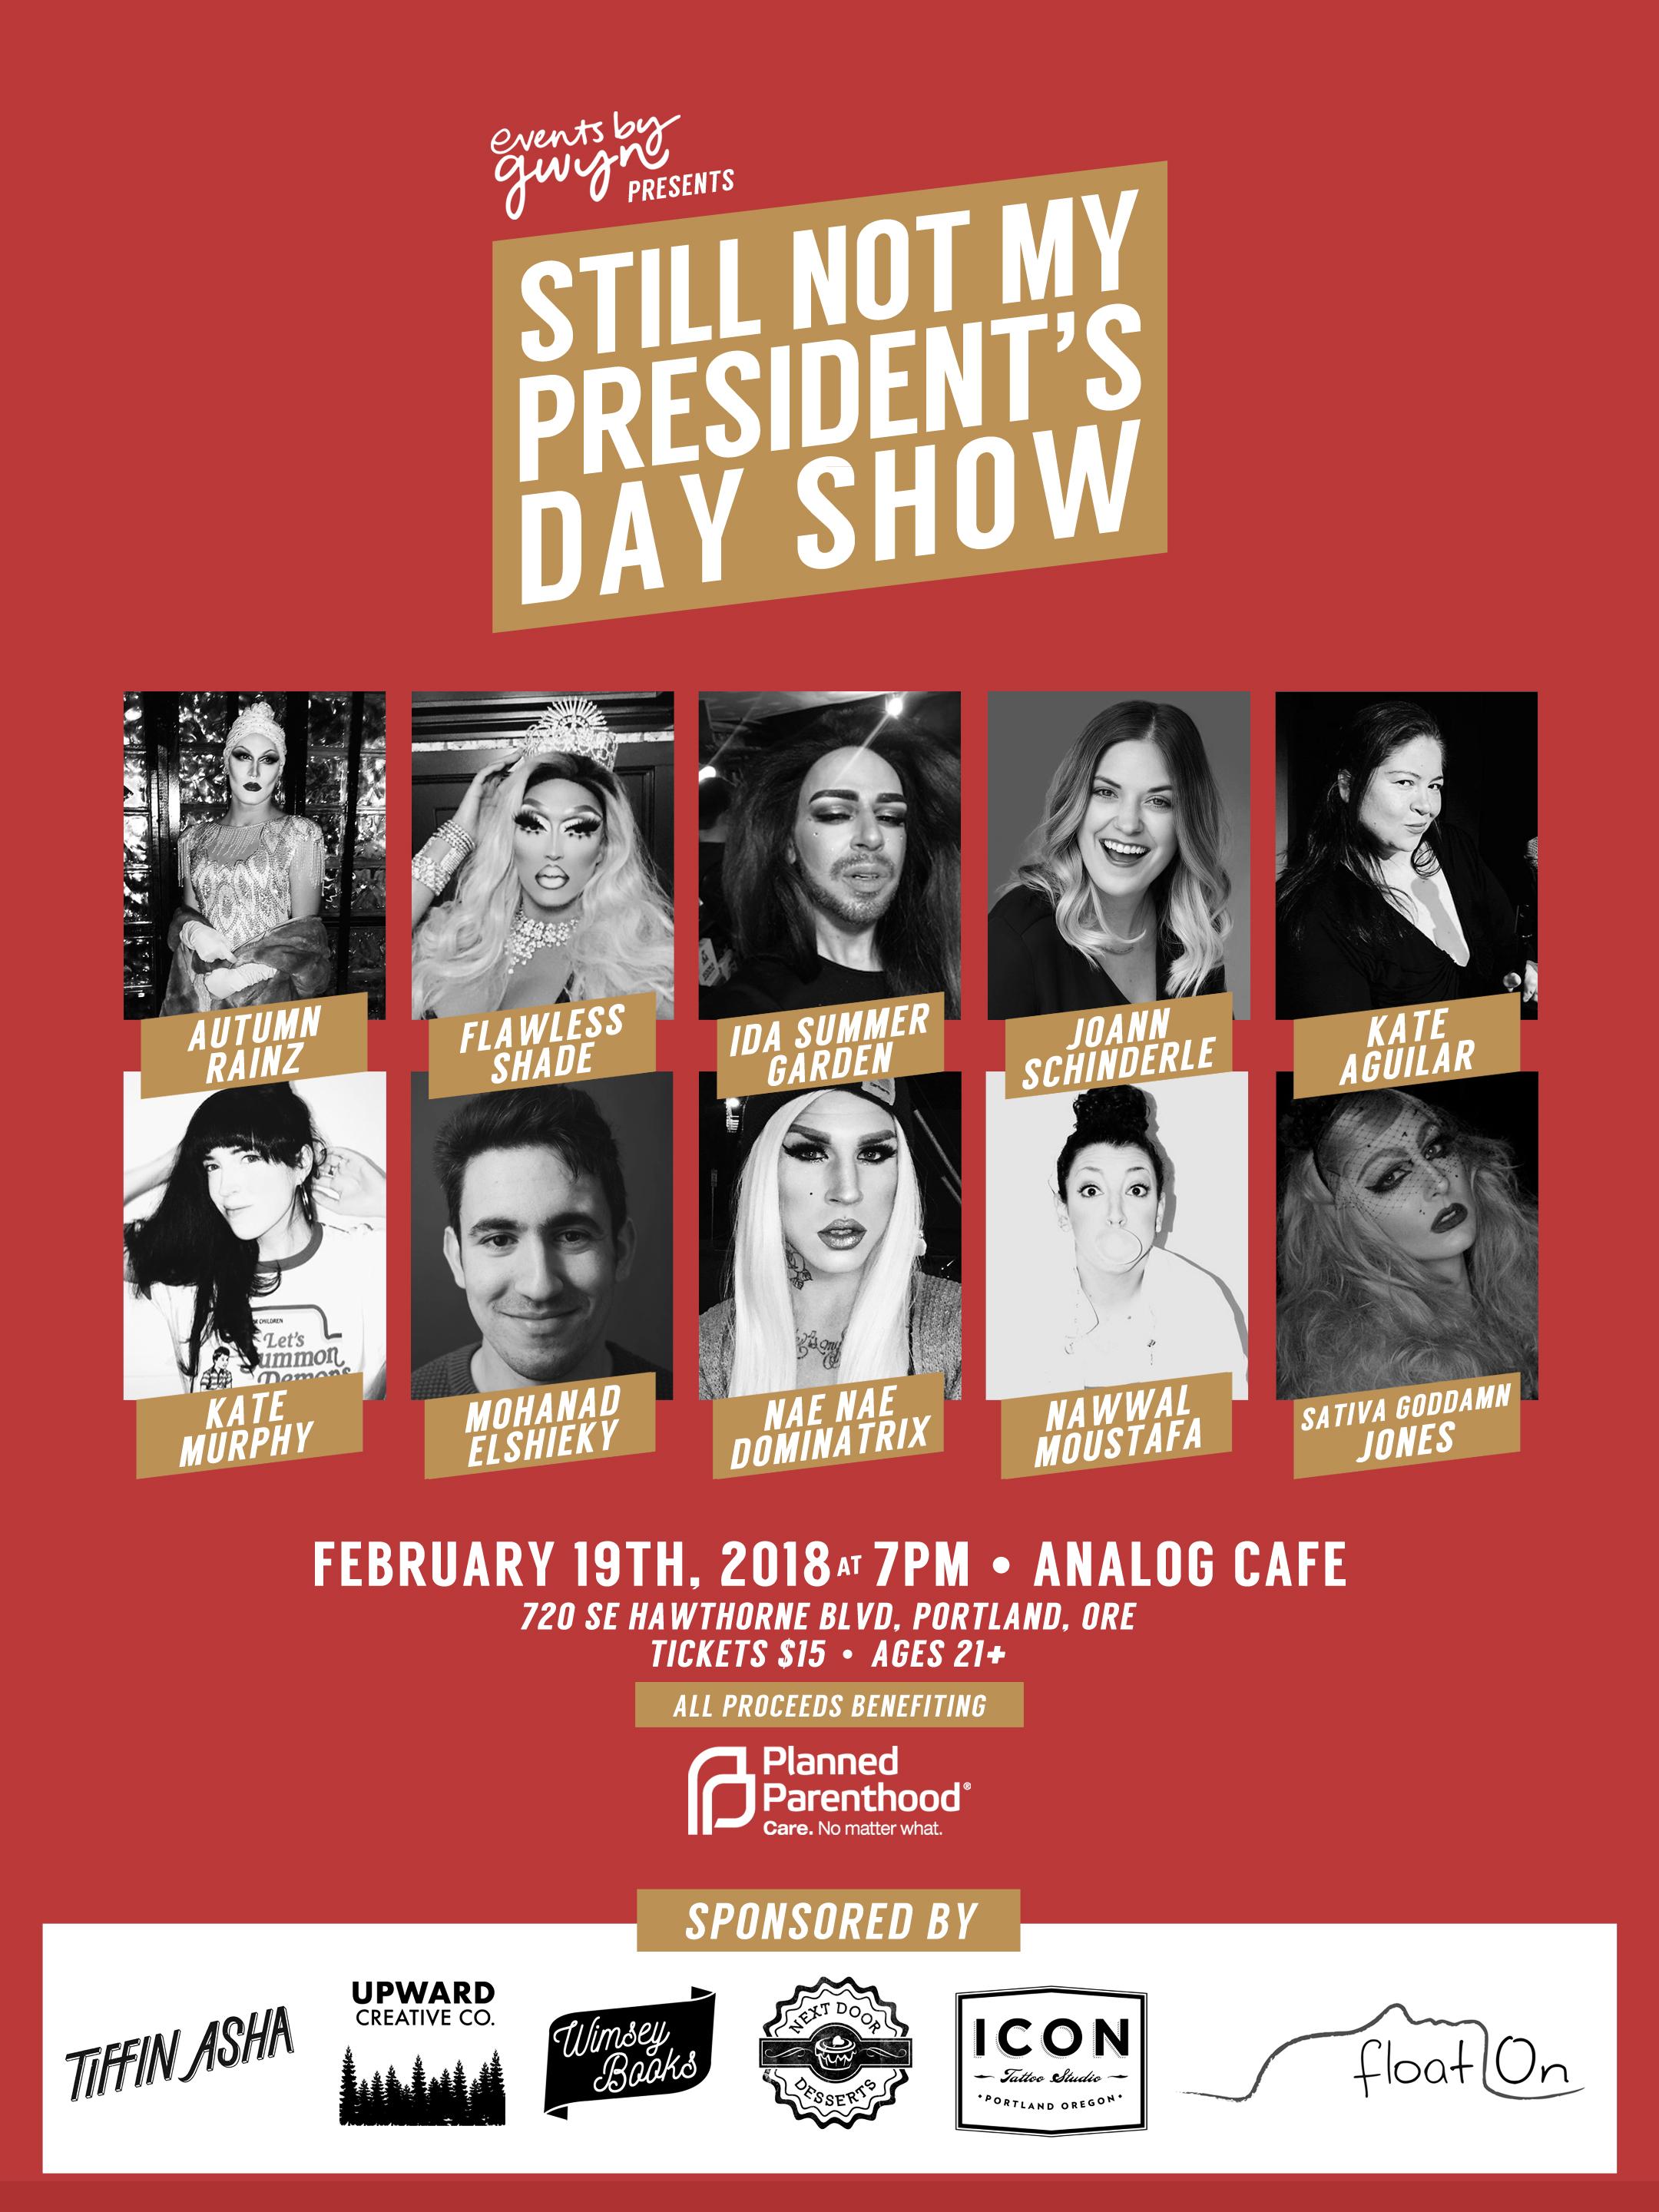 Still Not My President's Day Show Benefit for Planned Parenthood @ The Analog Cafe and Theater